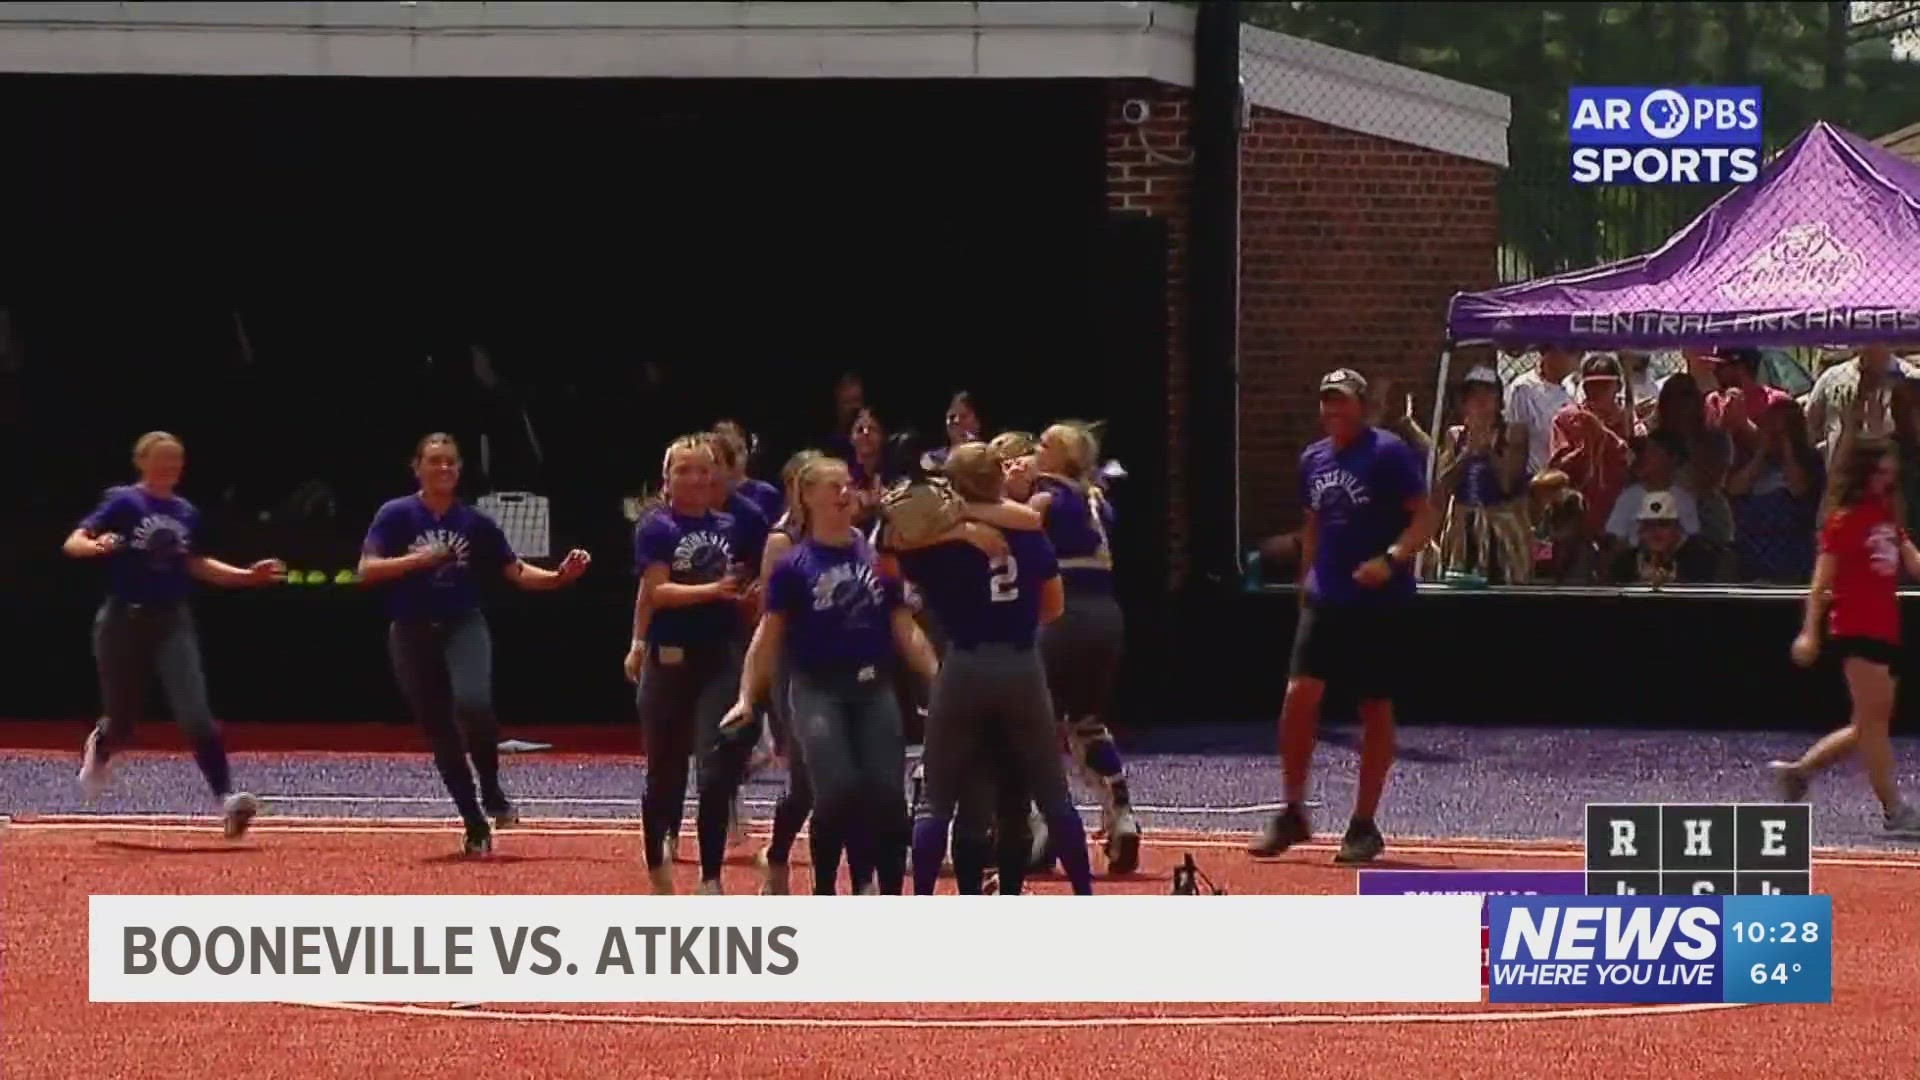 Lady Bearcats take down Atkins for first title since 2004.